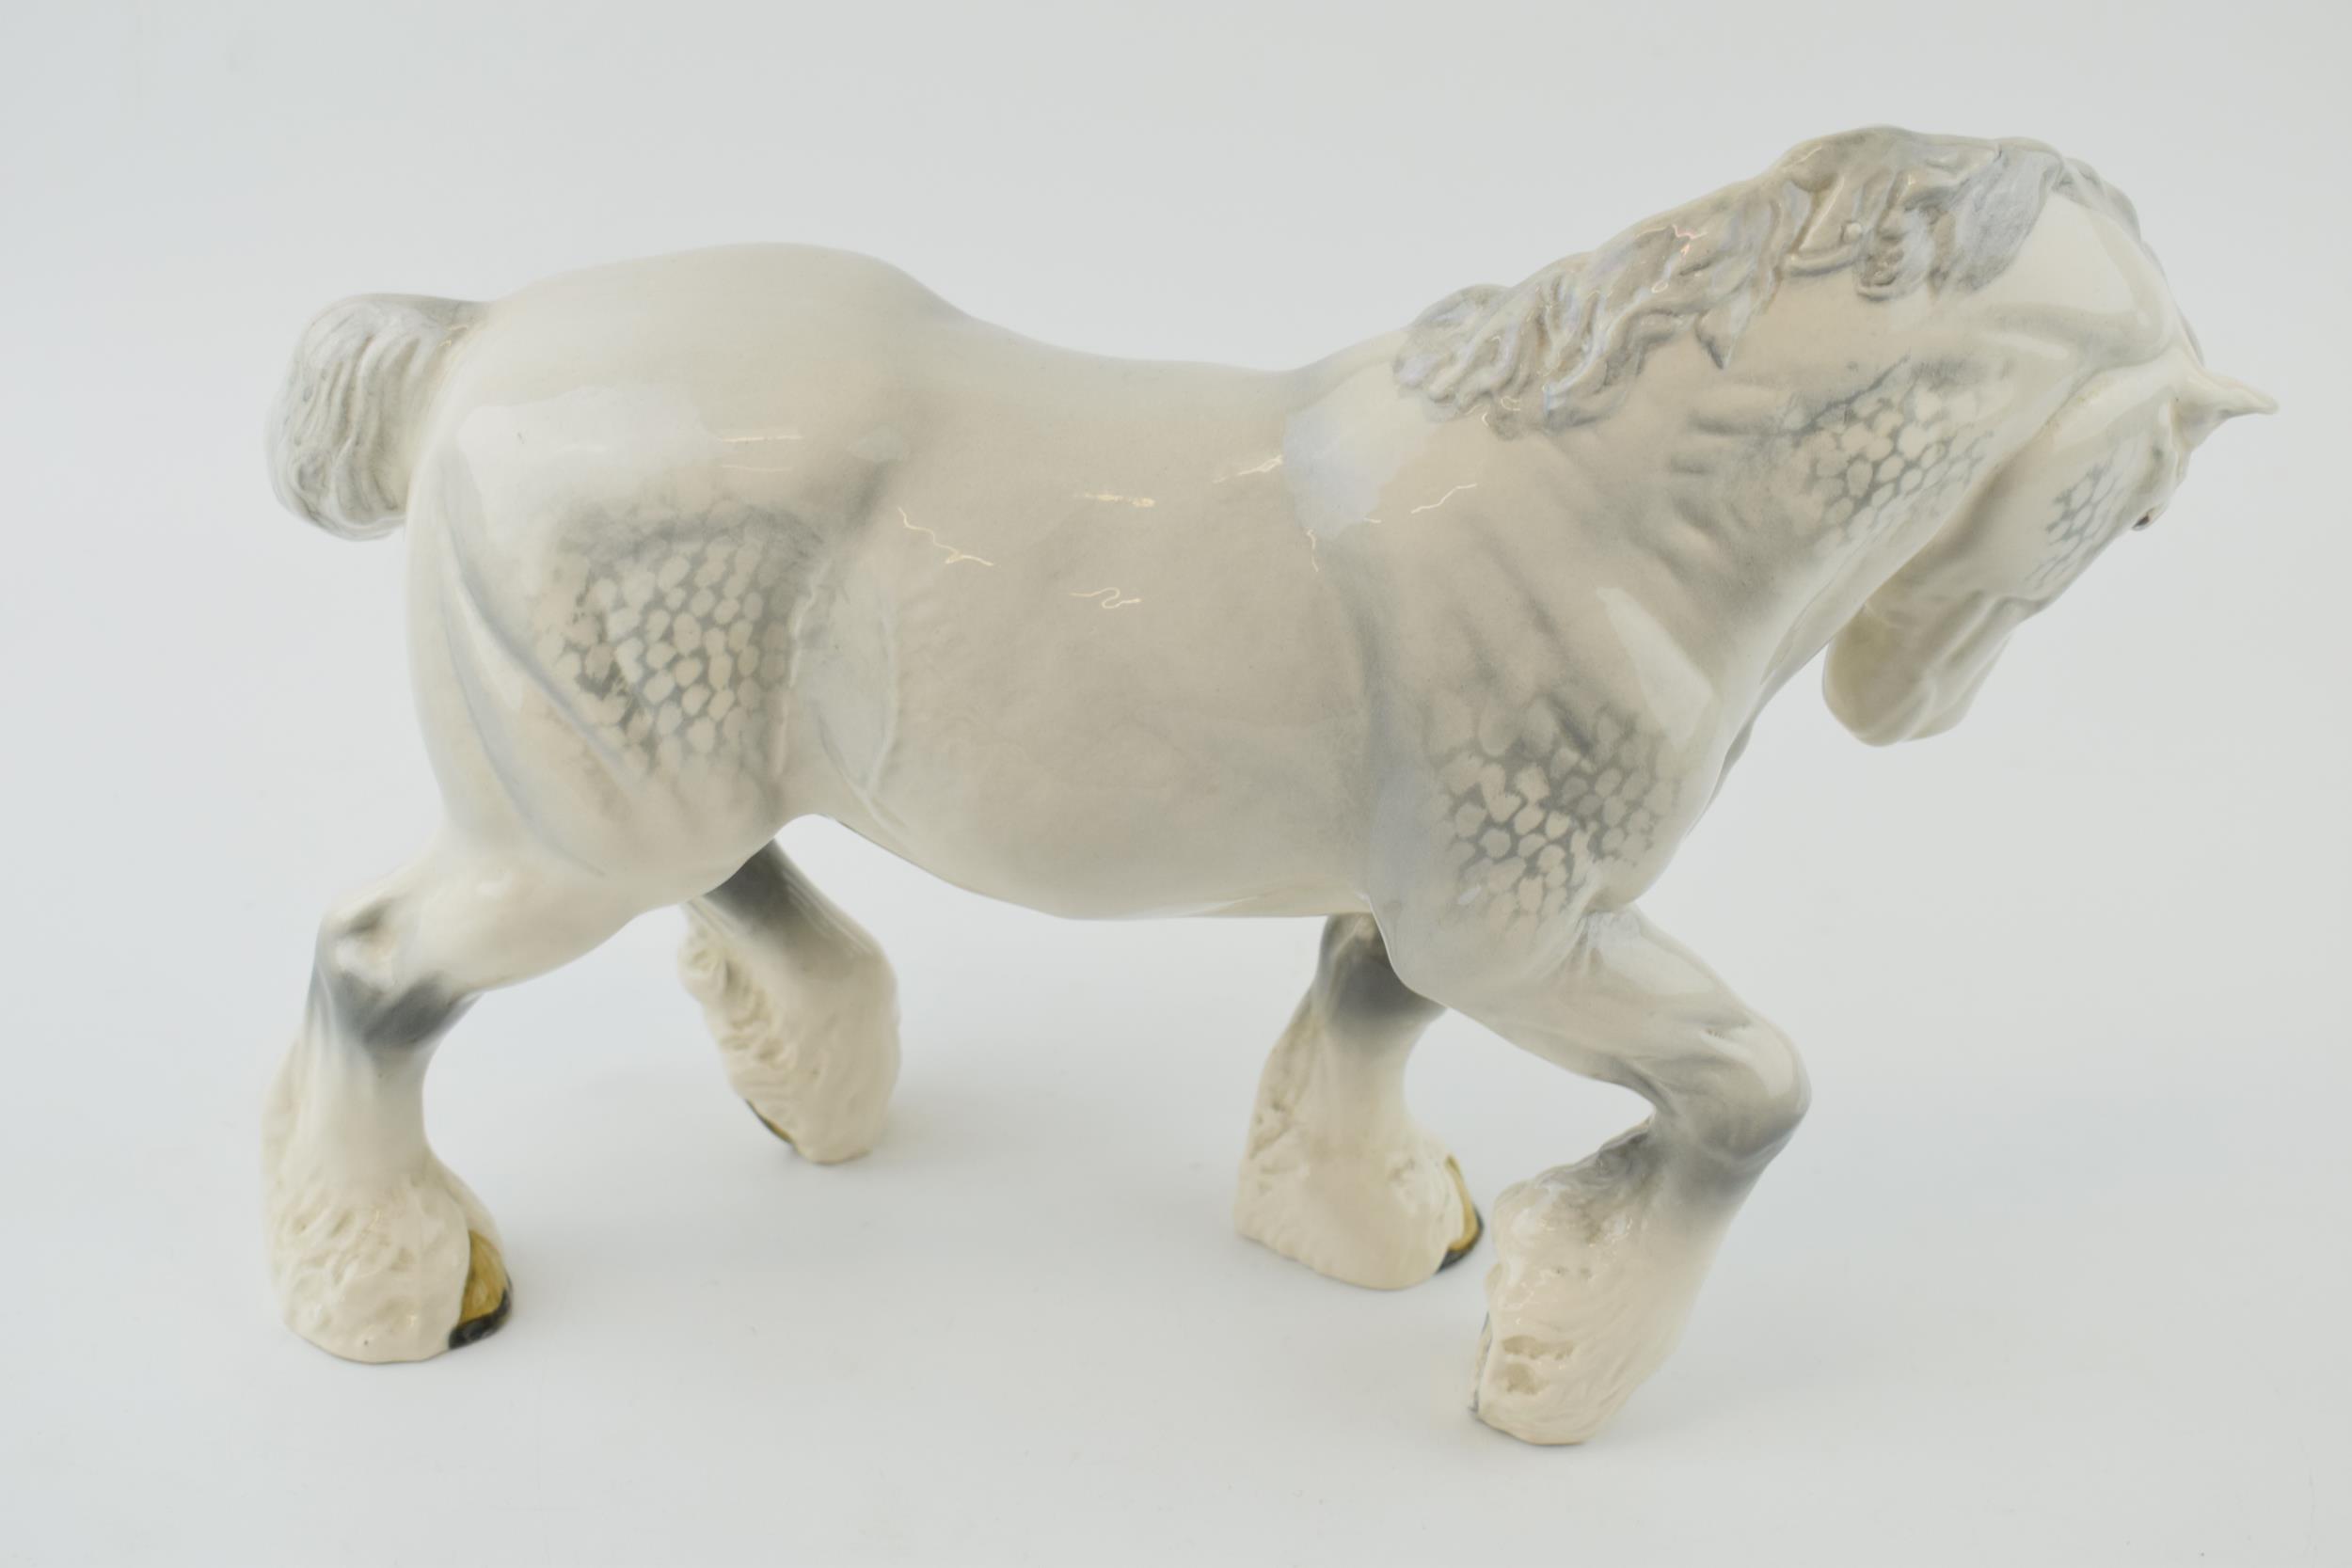 Beswick Action Shire Horse in grey 2578 In good condition with no obvious damage or restoration. - Image 2 of 3